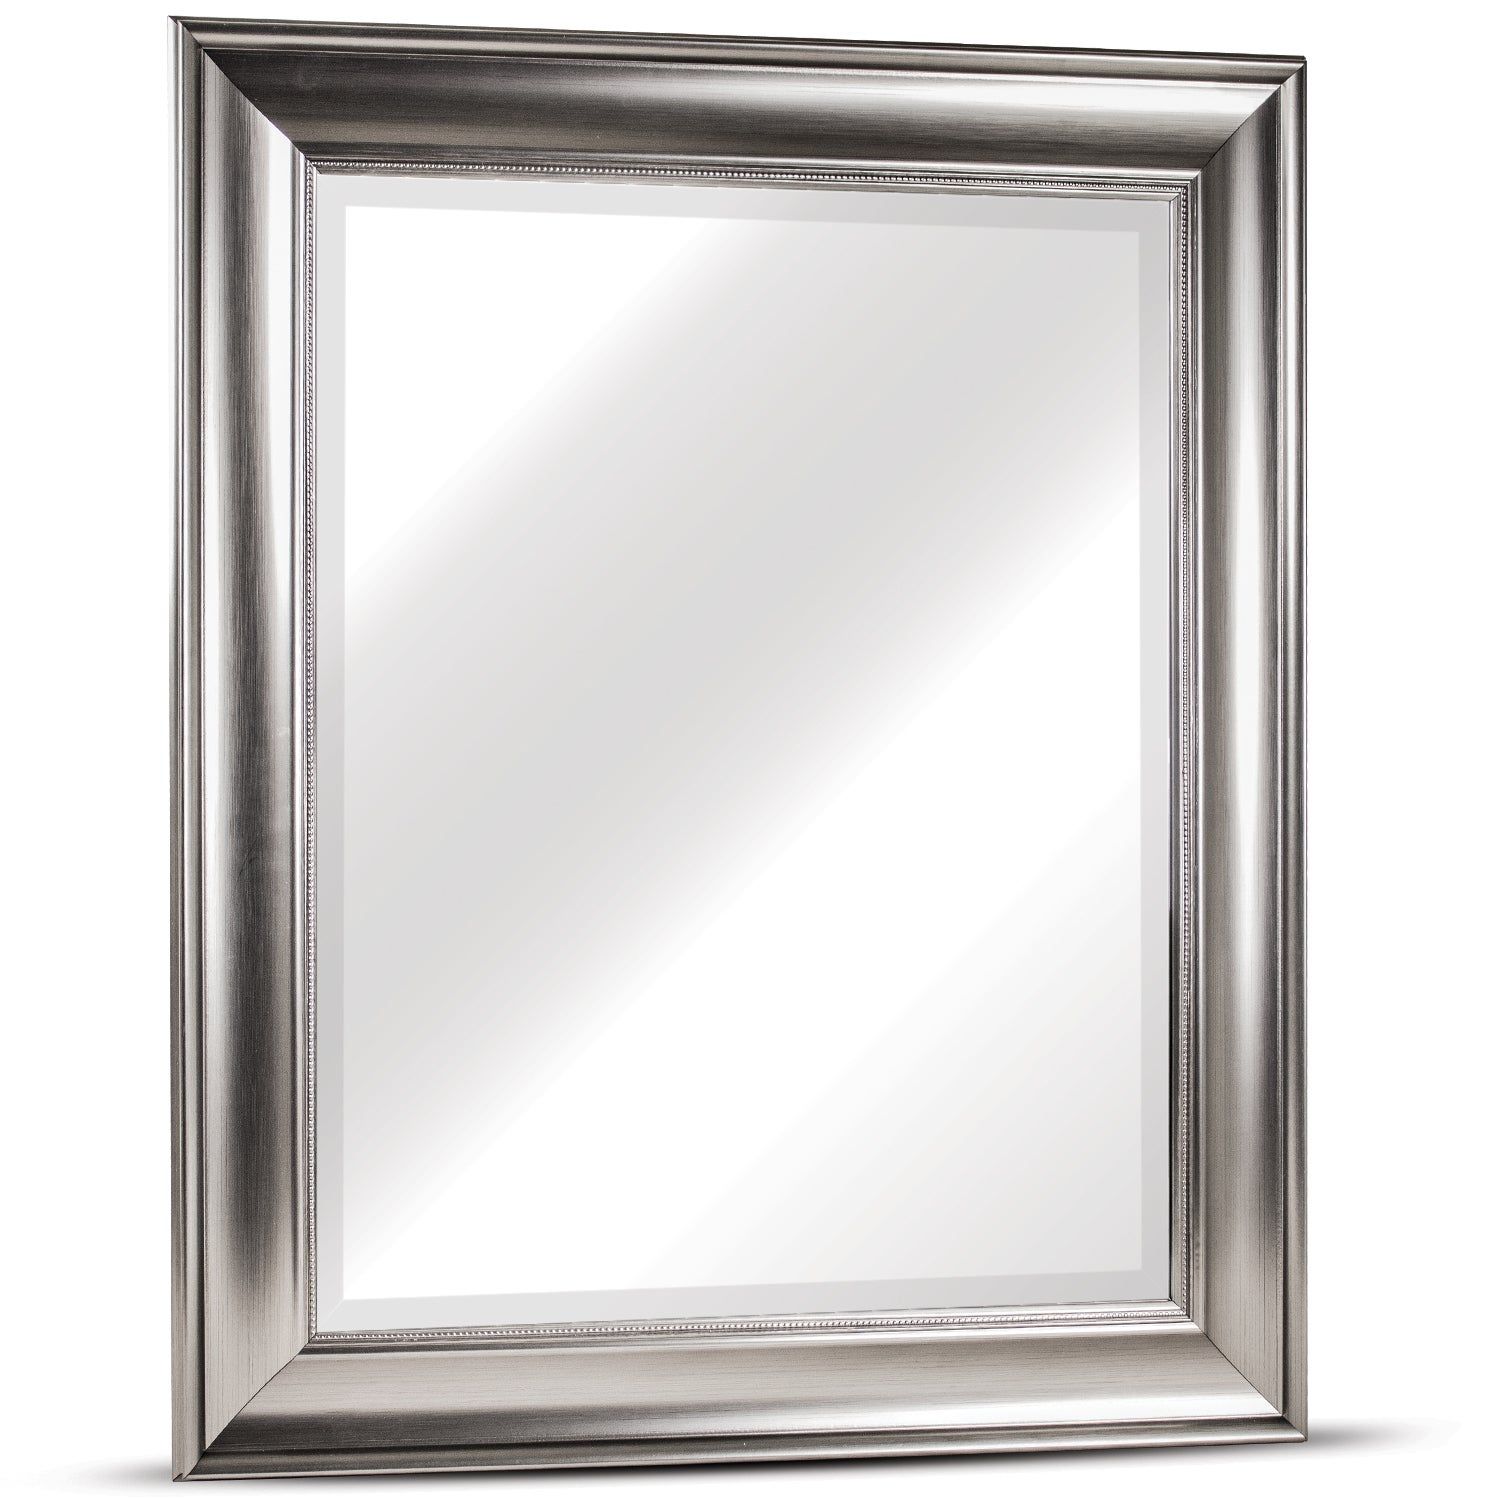 American Art Decor Clarence Medium Rectangular Silver Textured Accent  Framed Beveled Wall Vanity Mirror – A/n Pertaining To Juliana Accent Mirrors (View 15 of 20)